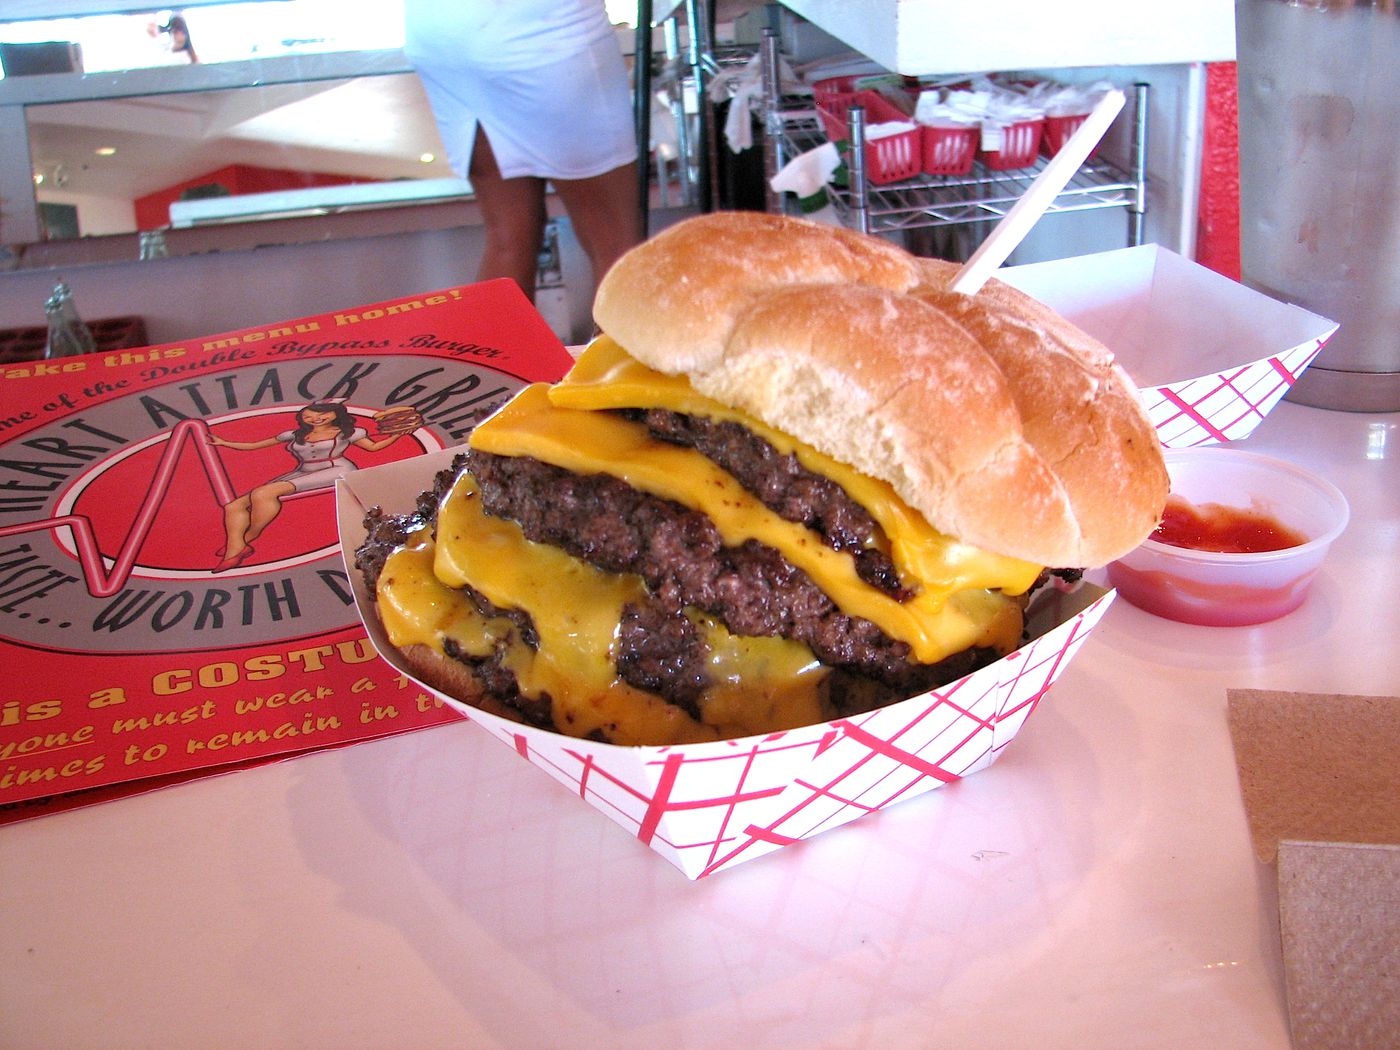 heart attack grill menu - ne odle Double Bupa Worth is a Costu yone must weak a imes to remain in to